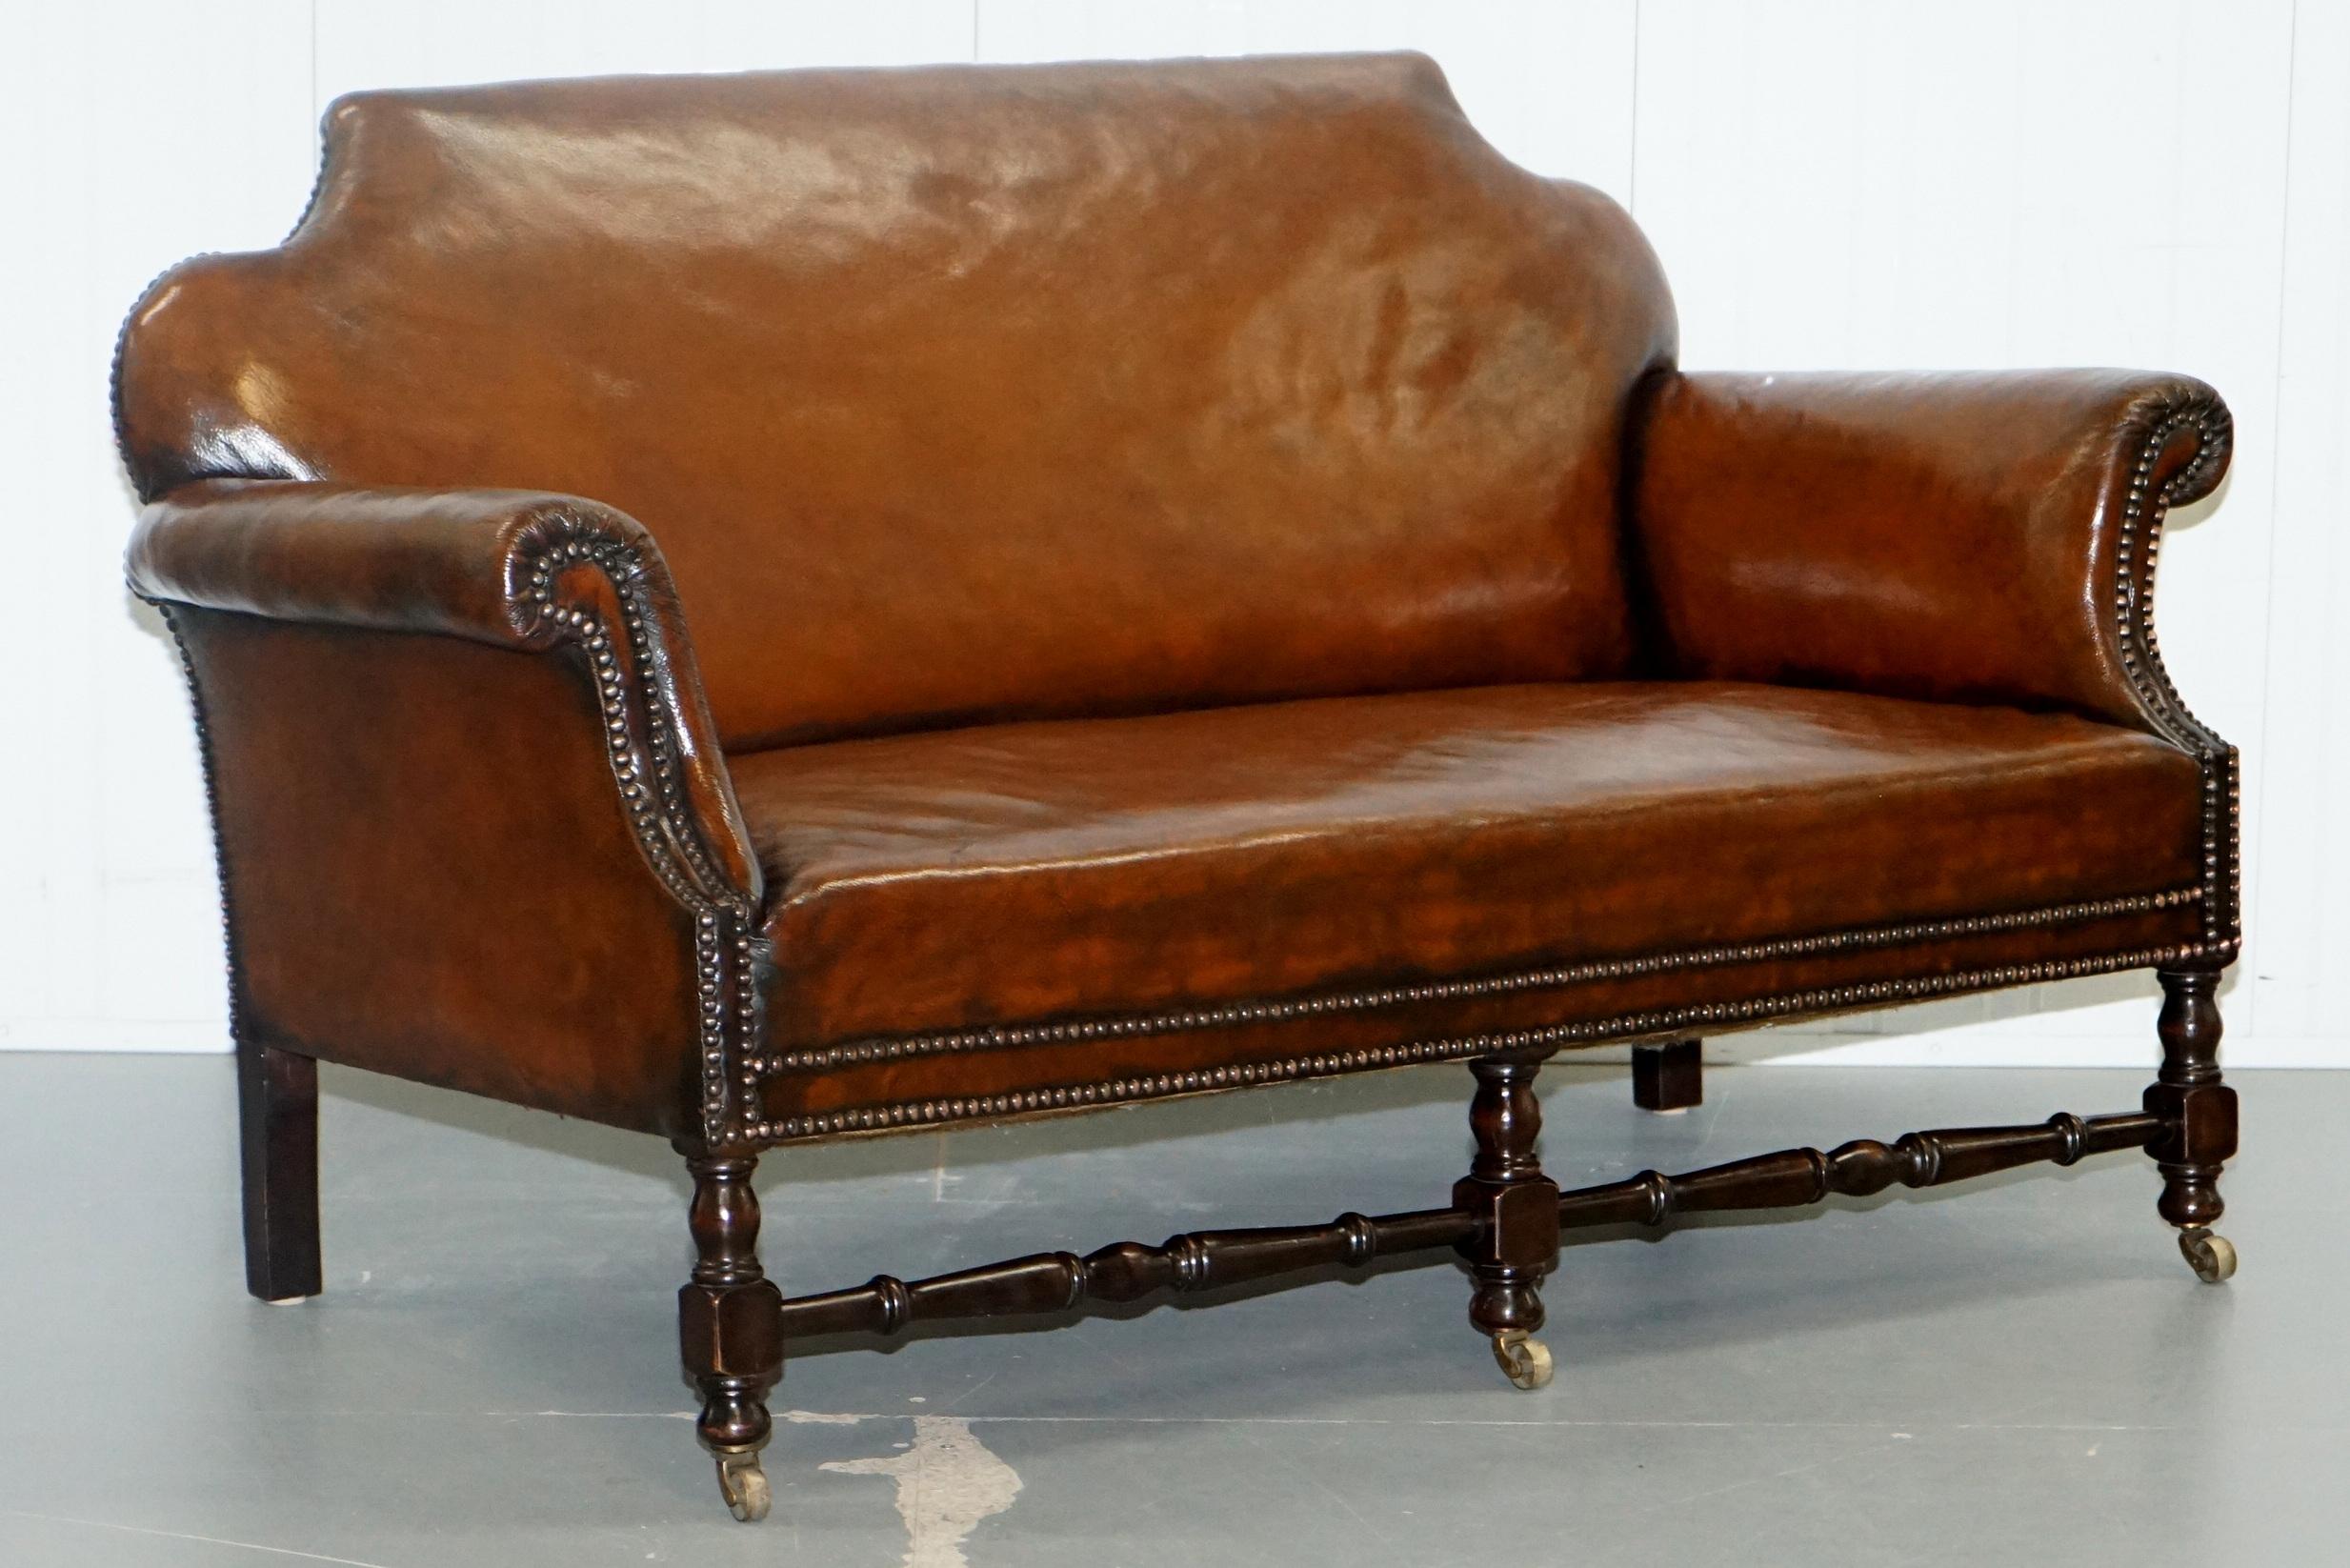 We are delighted to offer for sale this stunning very rare fully restored cigar brown leather Humpback Gentleman's club suite with a hand-turned mahogany frame finished with brass castors.

Where to begin! This suite is absolute eye candy from